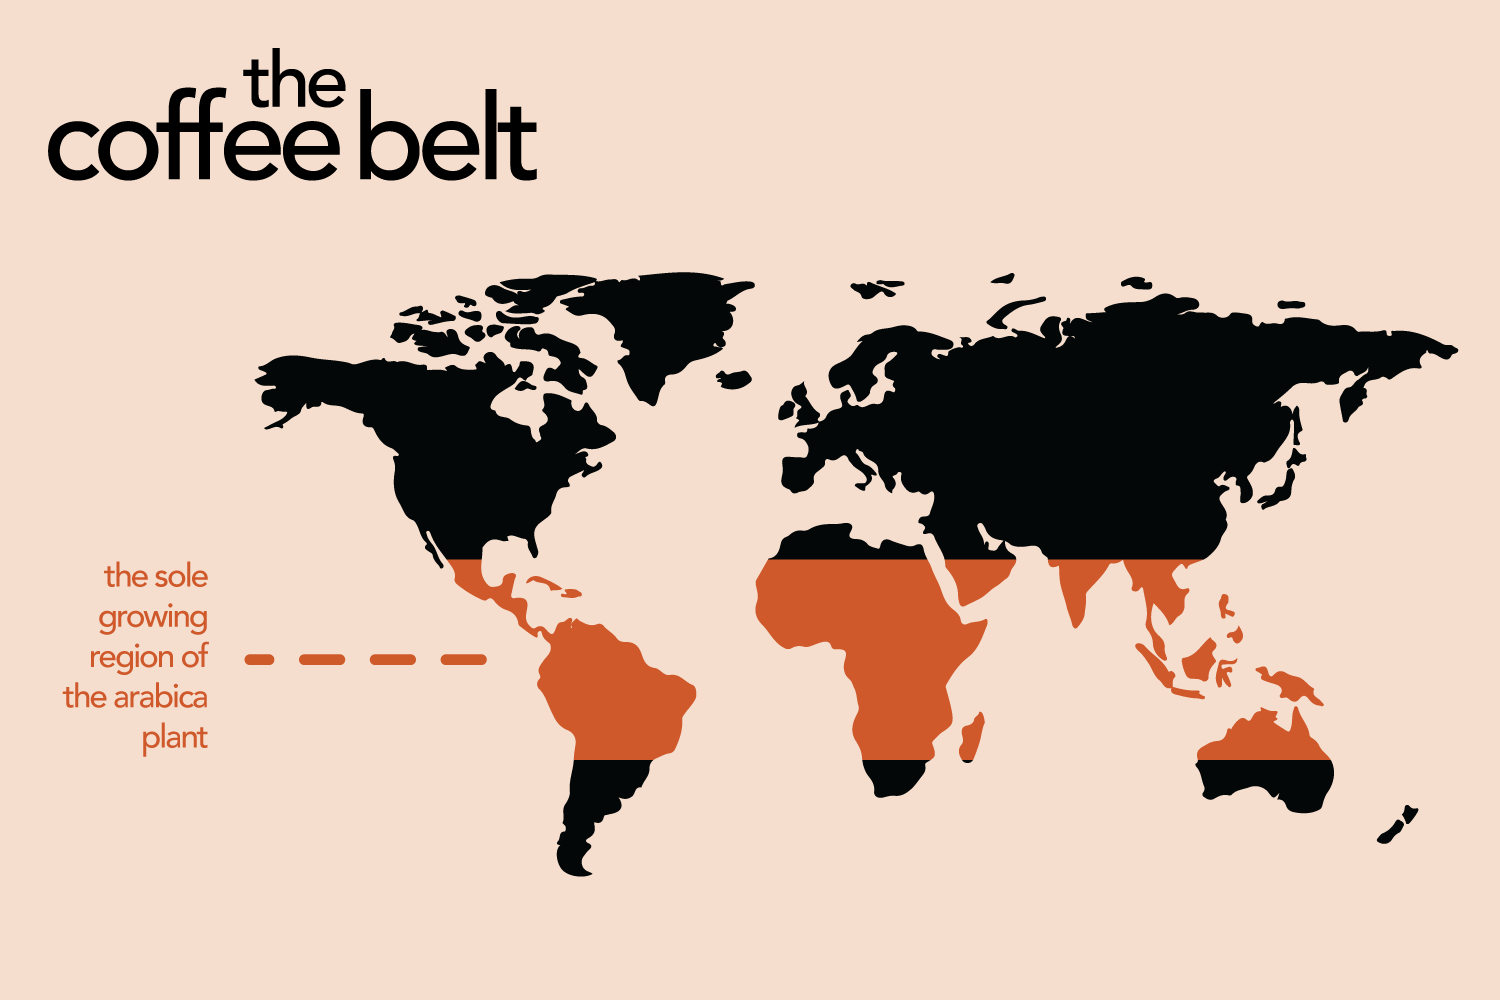 the coffee belt, the strip of the world map in which all coffee regions are